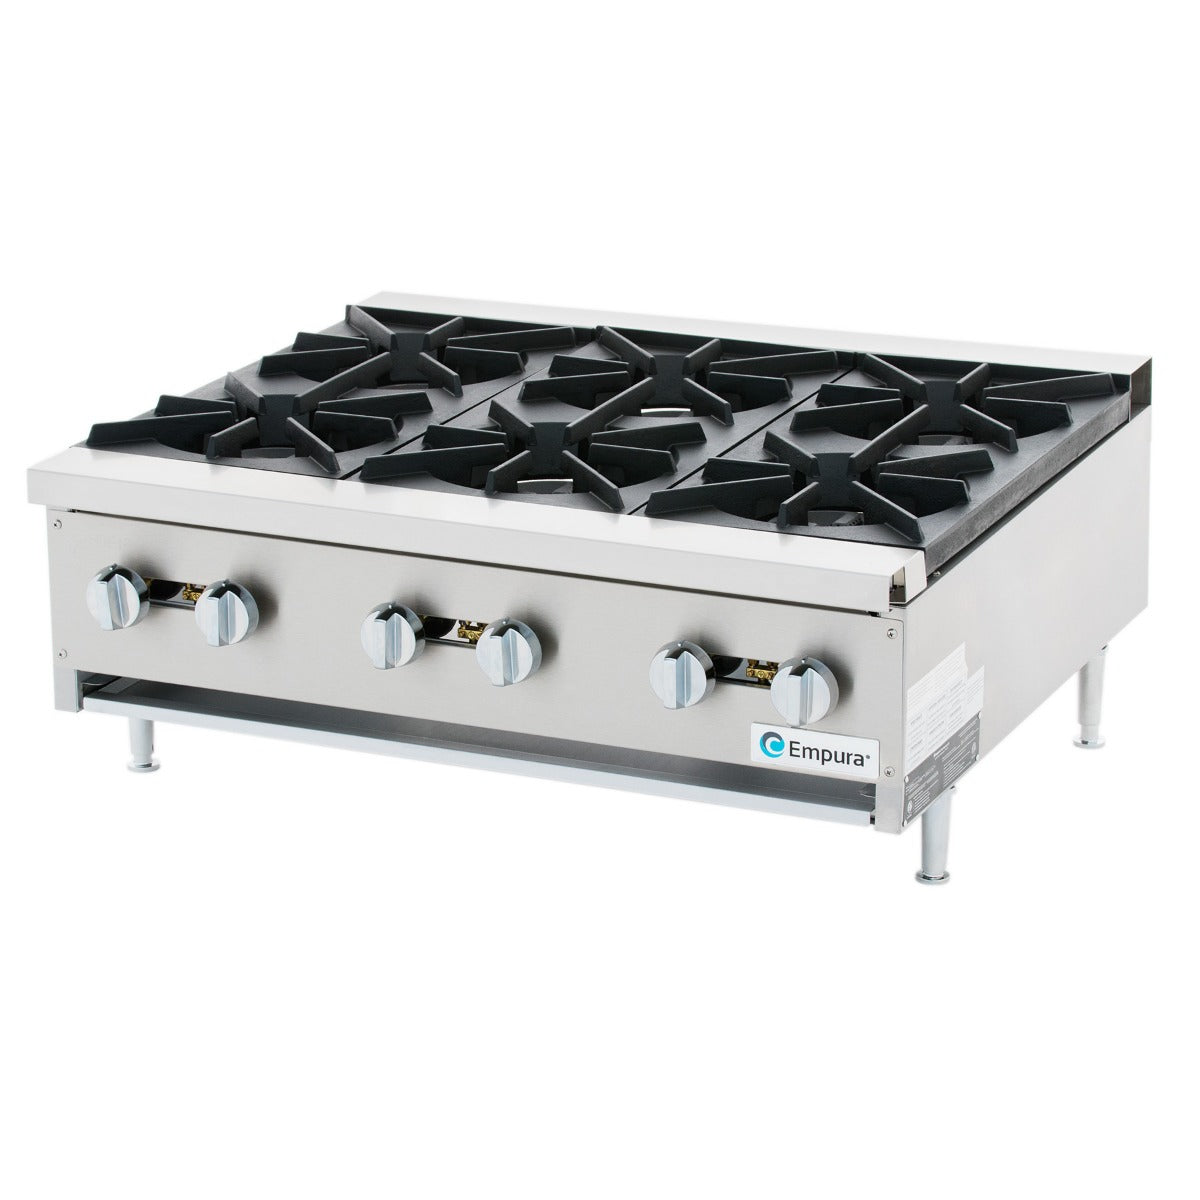 Empura EMHP6-HD 36" Stainless Steel Heavy Duty Gas Hot Plate With 6 Burners, 180,000 BTU